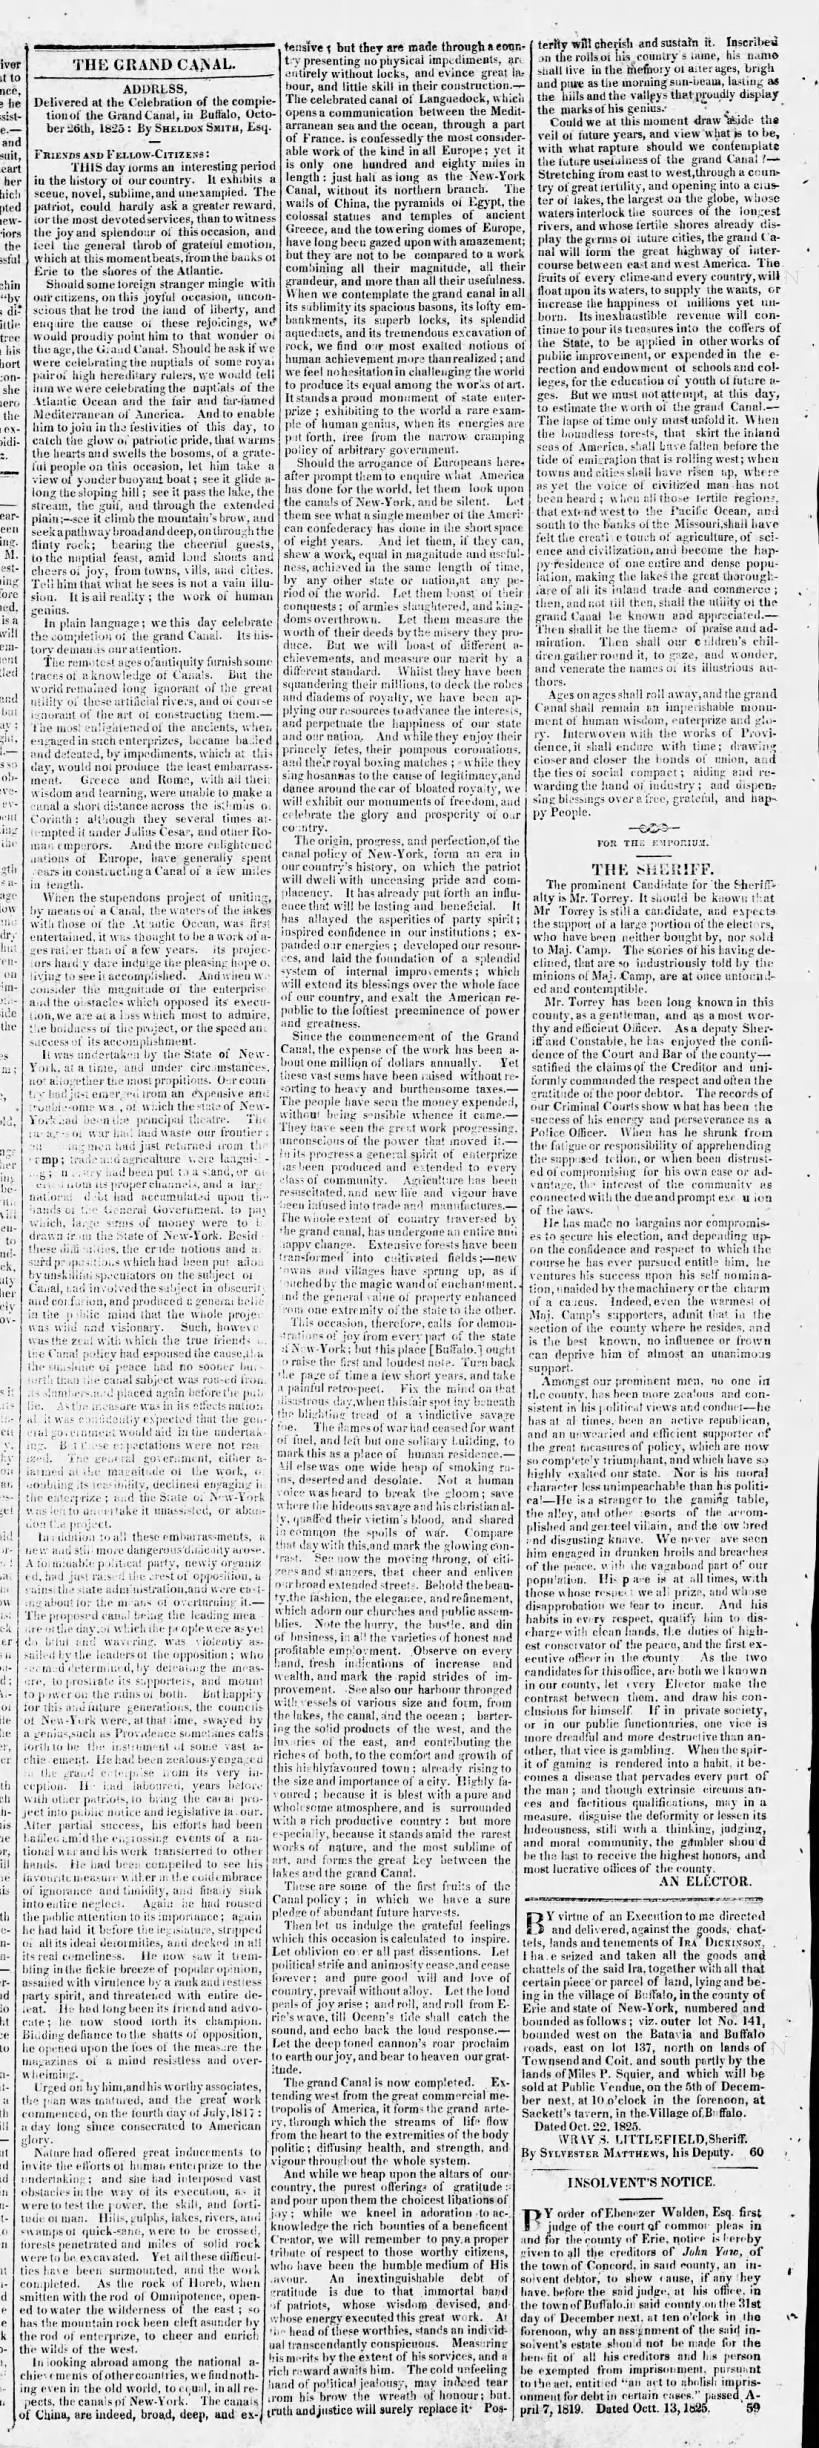 Newspaper prints speech given by Buffalo lawyer Sheldon Smith about opening of the Erie Canal